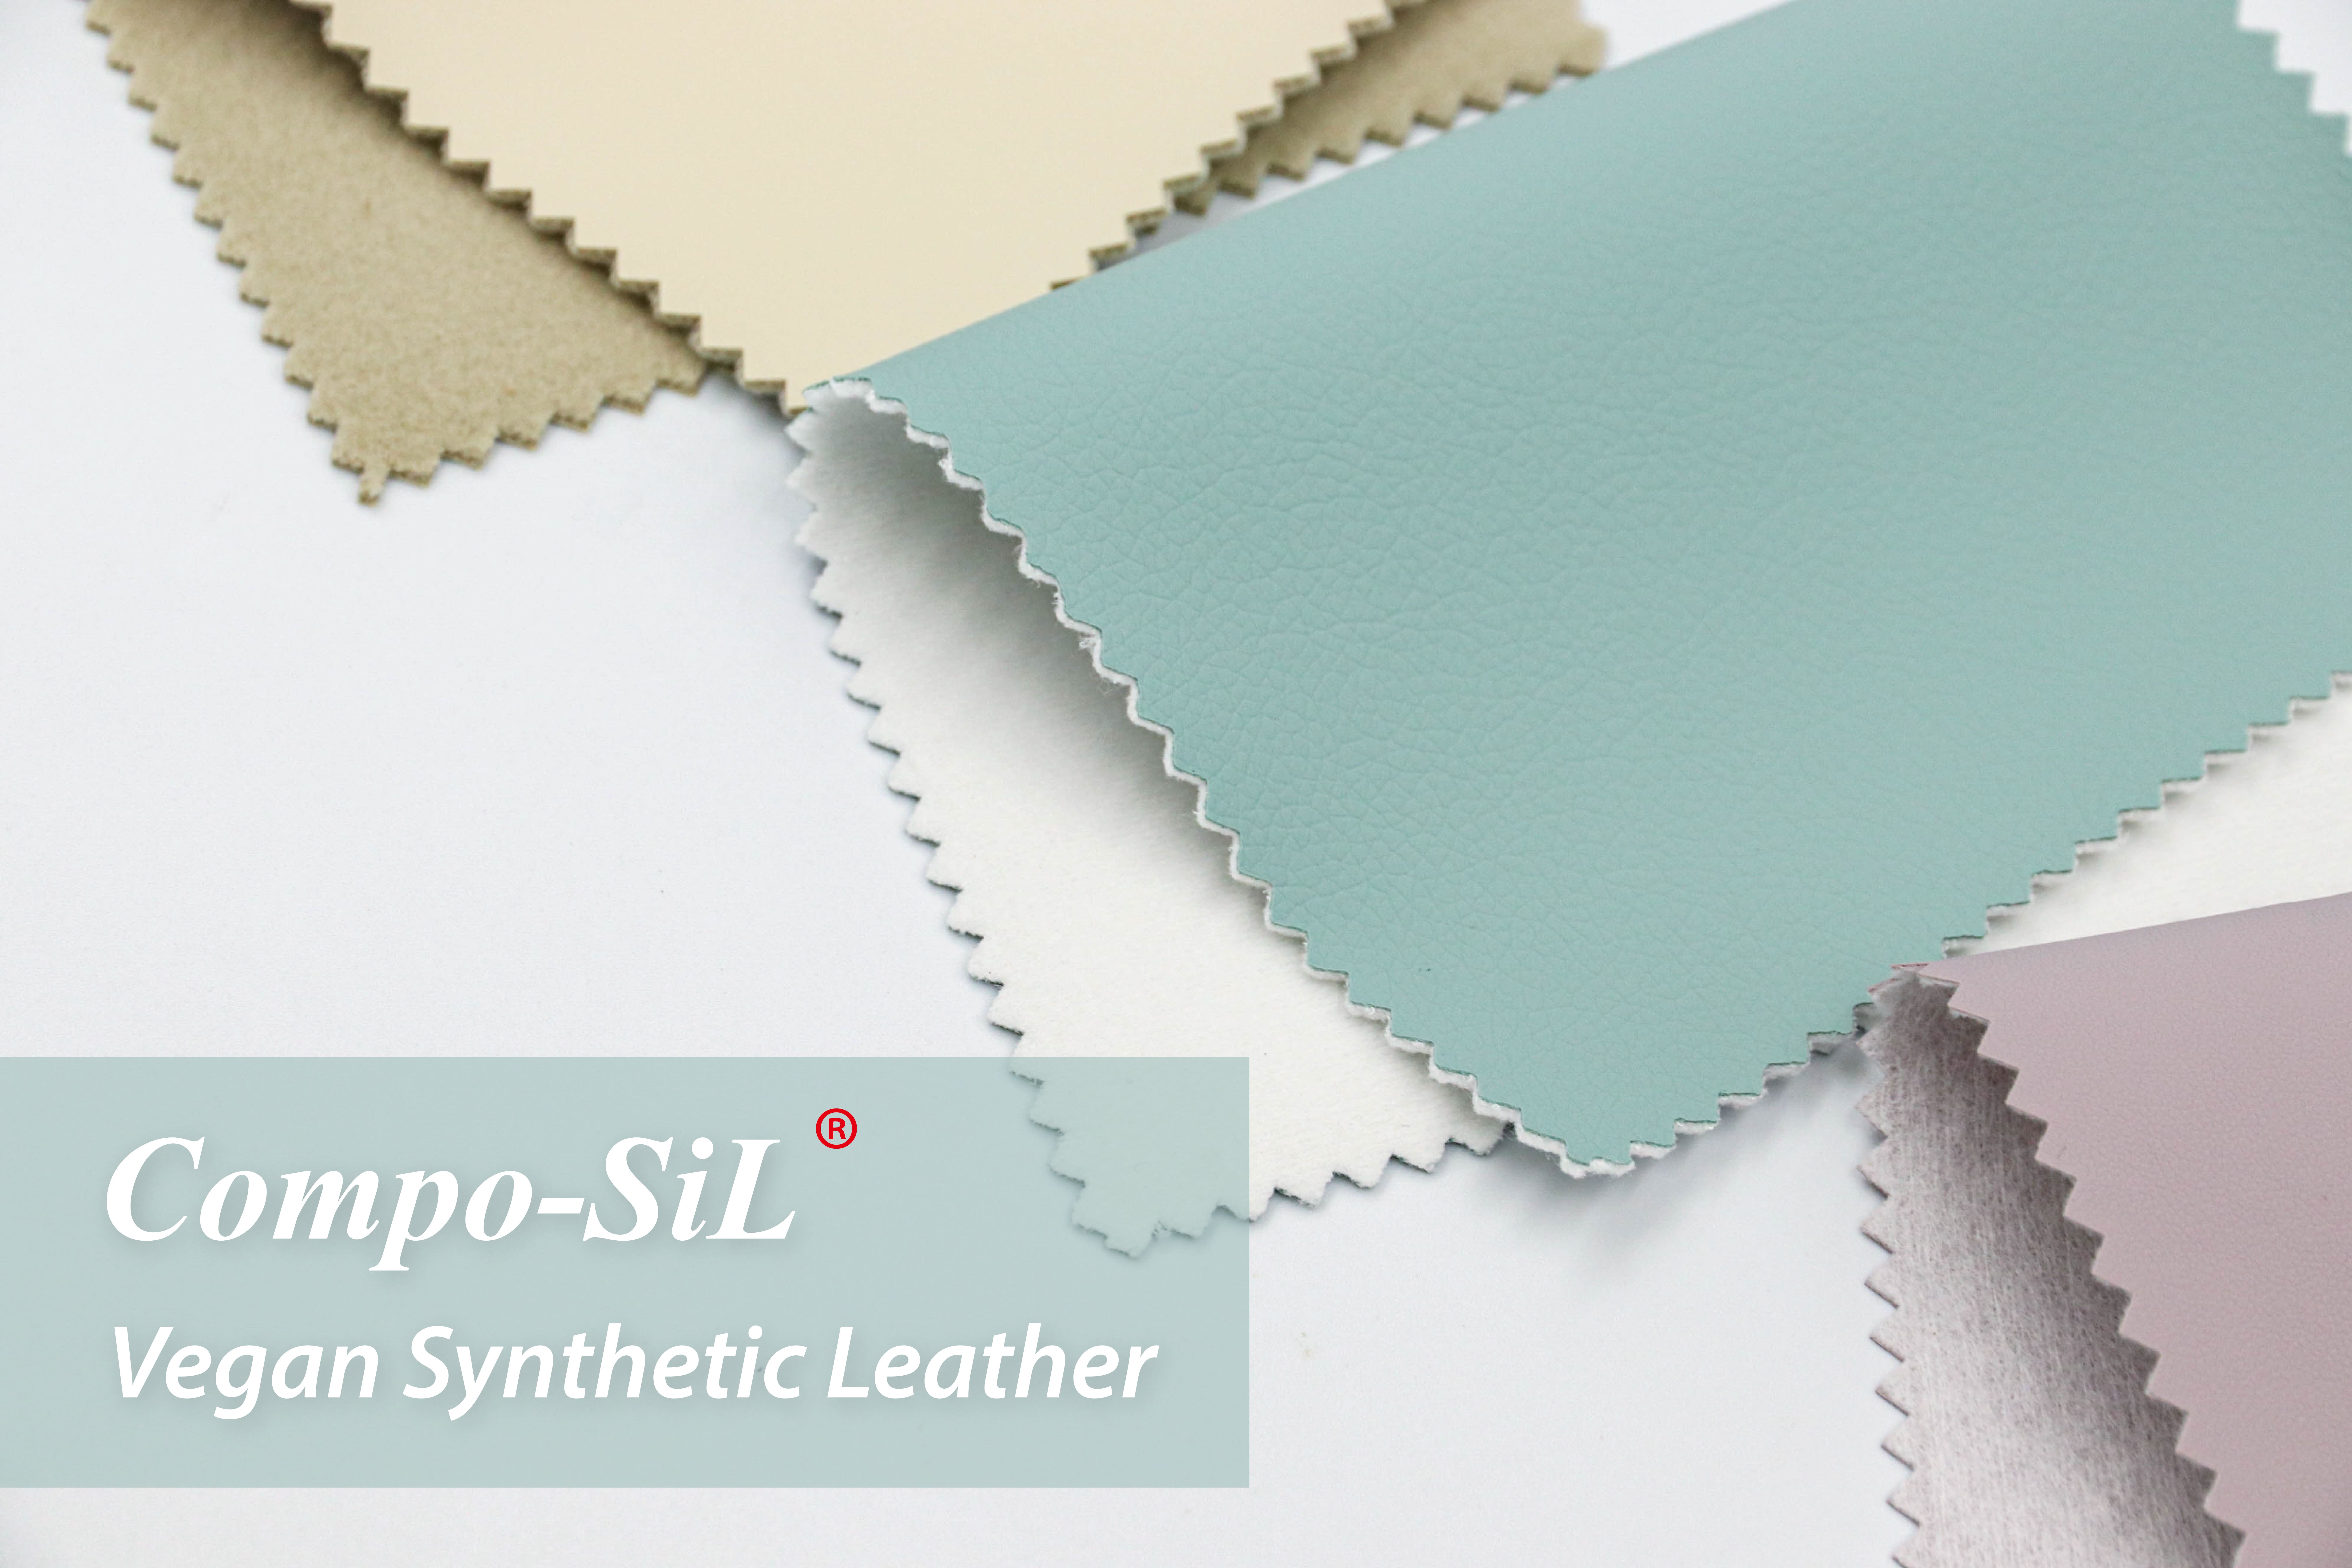 Compo-SiL® Releases Vegan Synthetic Leather